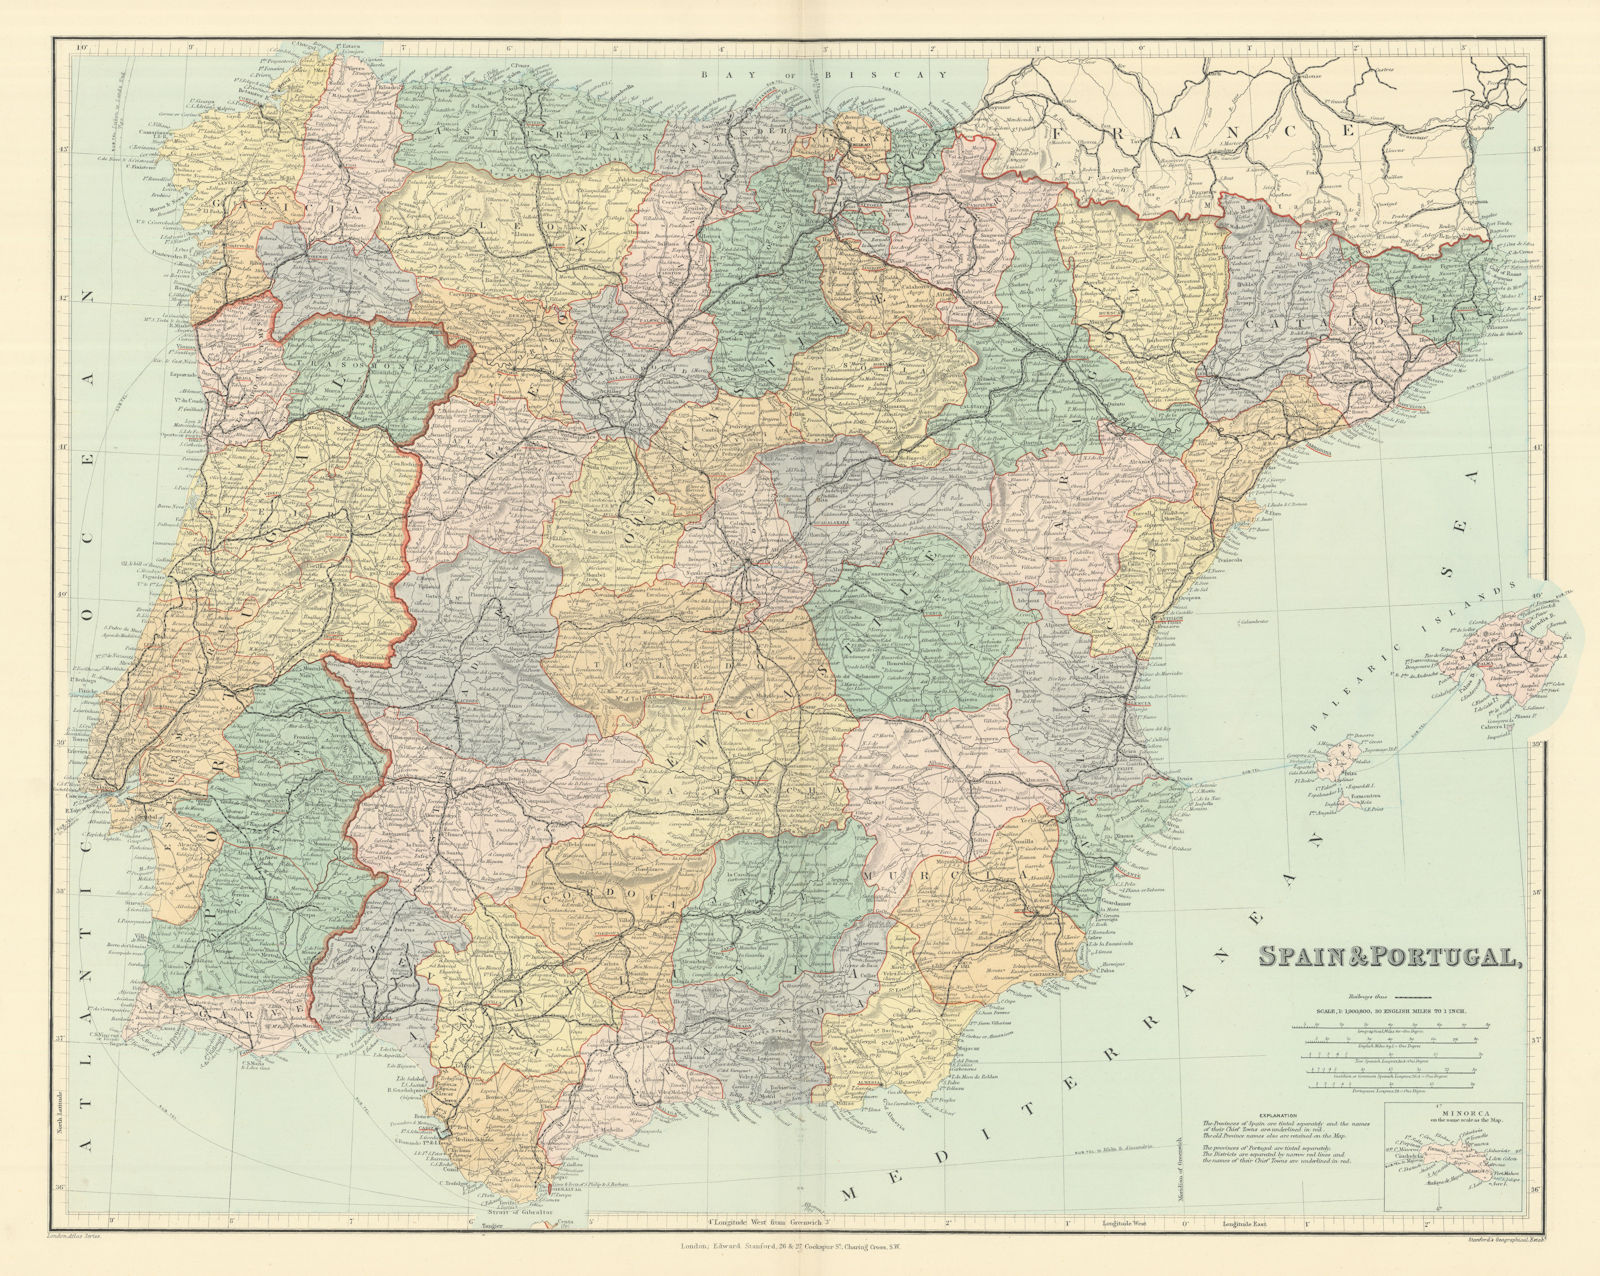 Associate Product Spain & Portugal. Iberia. Railways. Large 52x65cm. STANFORD 1894 old map